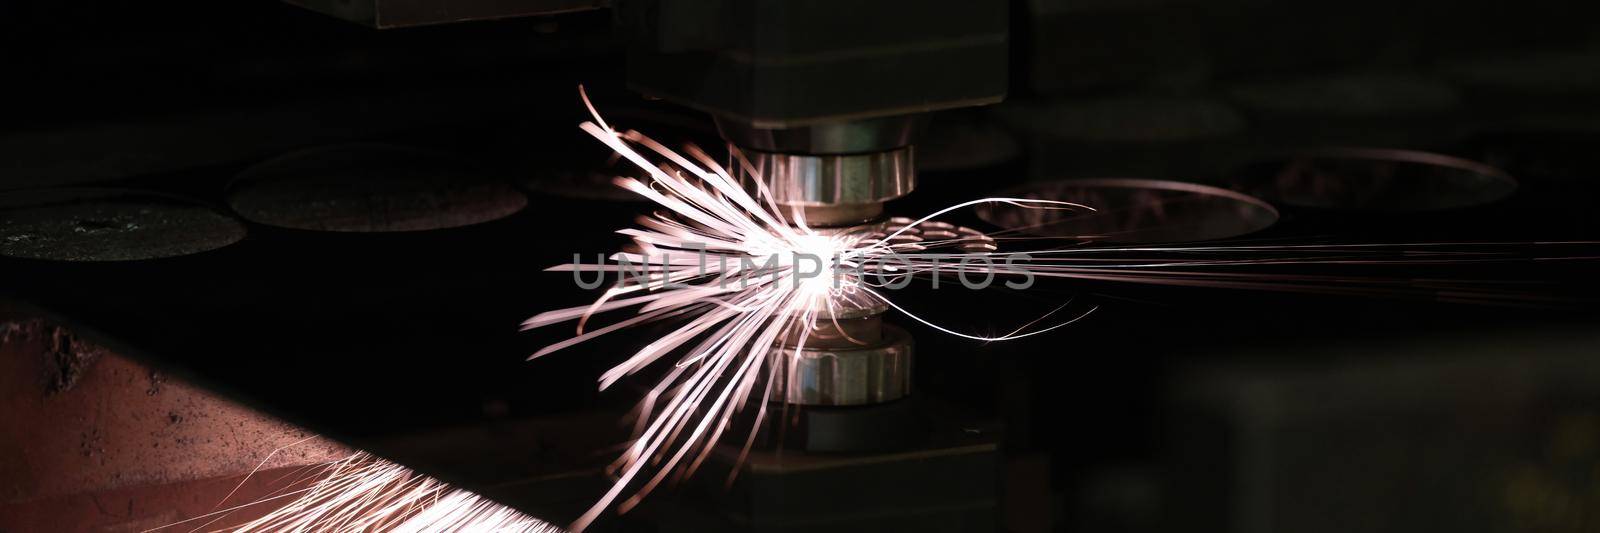 Bright sparks from metal turning, close-up. Laser cutting, mechanical engineering. Manufacturing complex parts